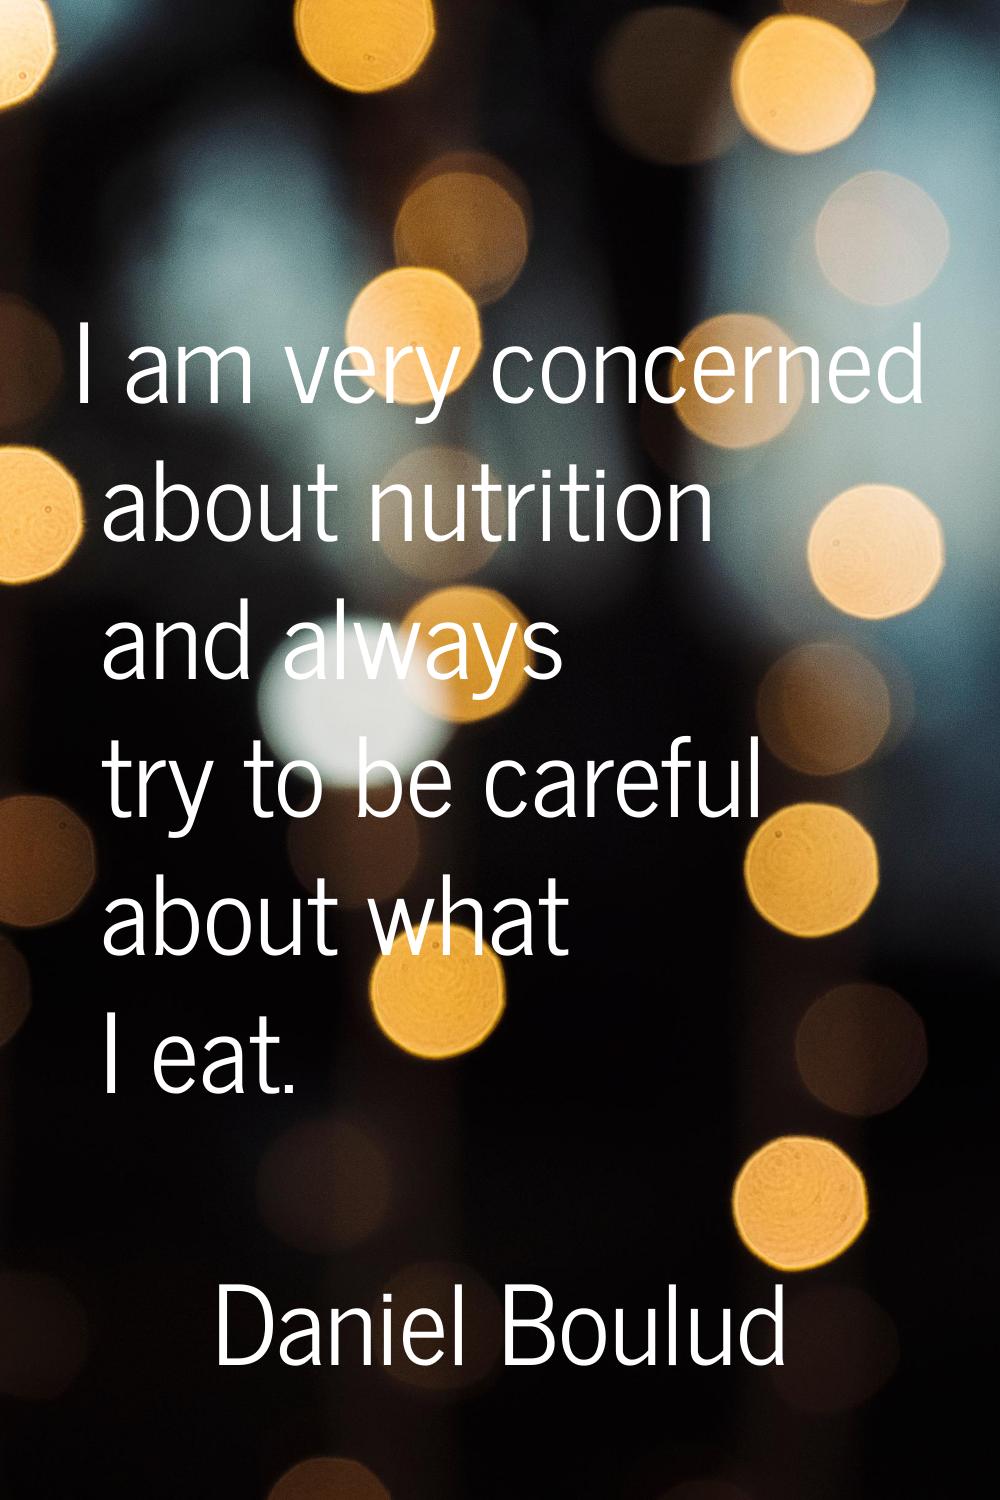 I am very concerned about nutrition and always try to be careful about what I eat.